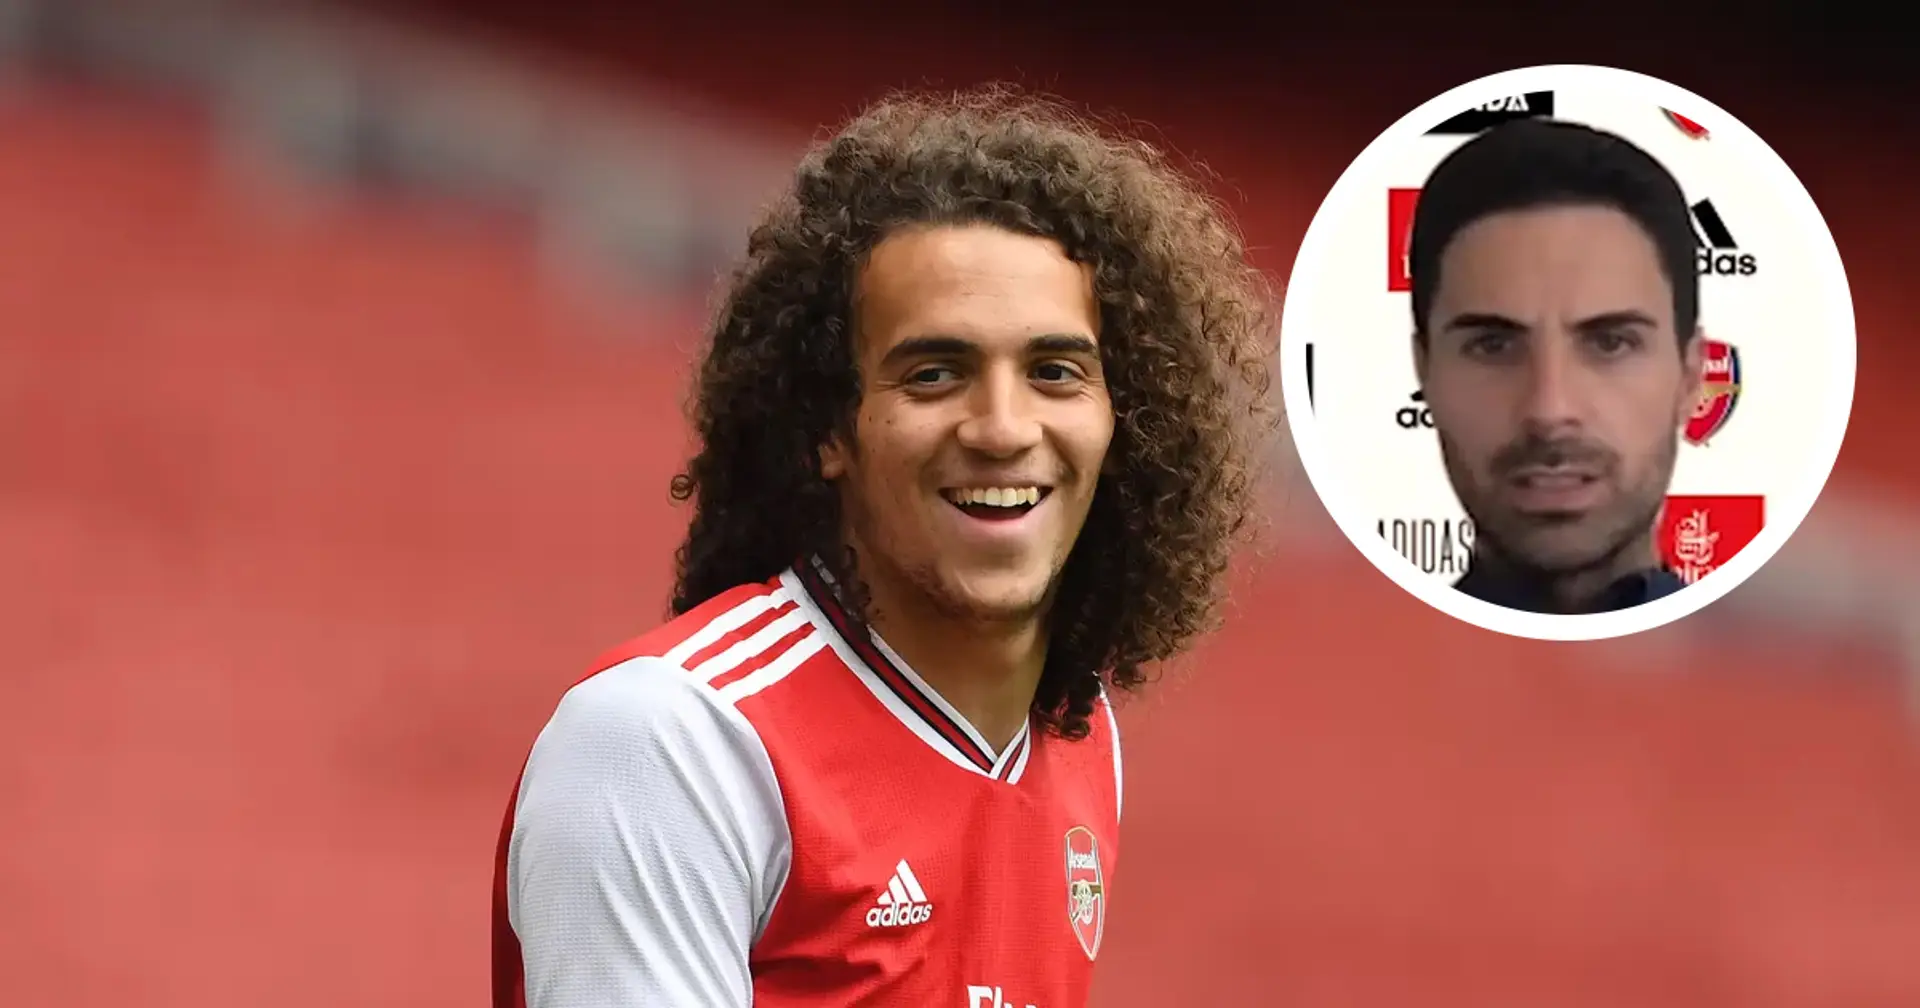 'Matteo has been training like any other player in the squad': Arteta confirms Guendouzi has future at Arsenal